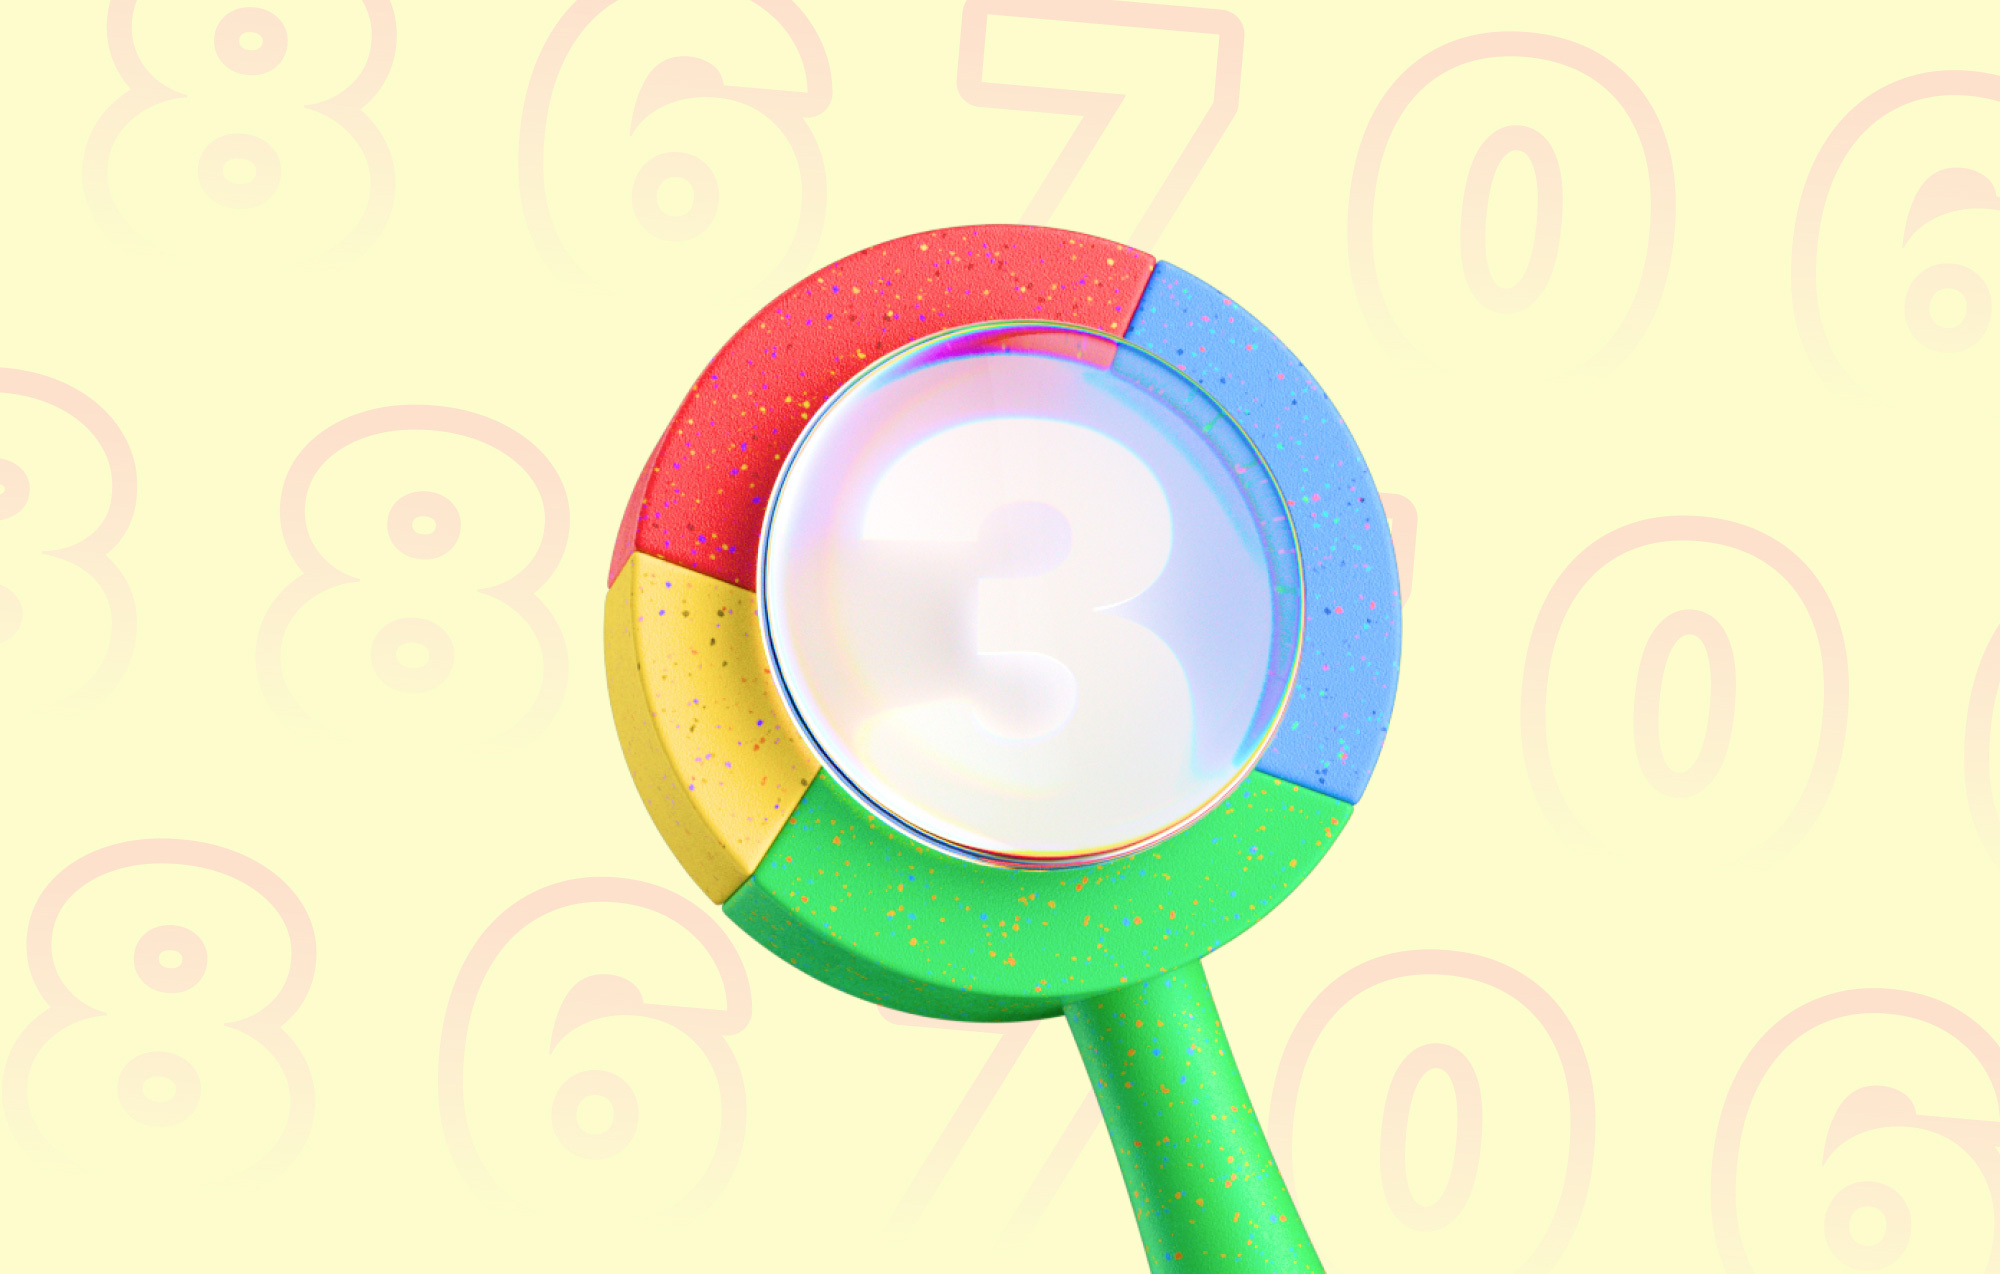 Header image for Google Analytics blog post: magnifying glass in Google brand colors zooming in on numbers